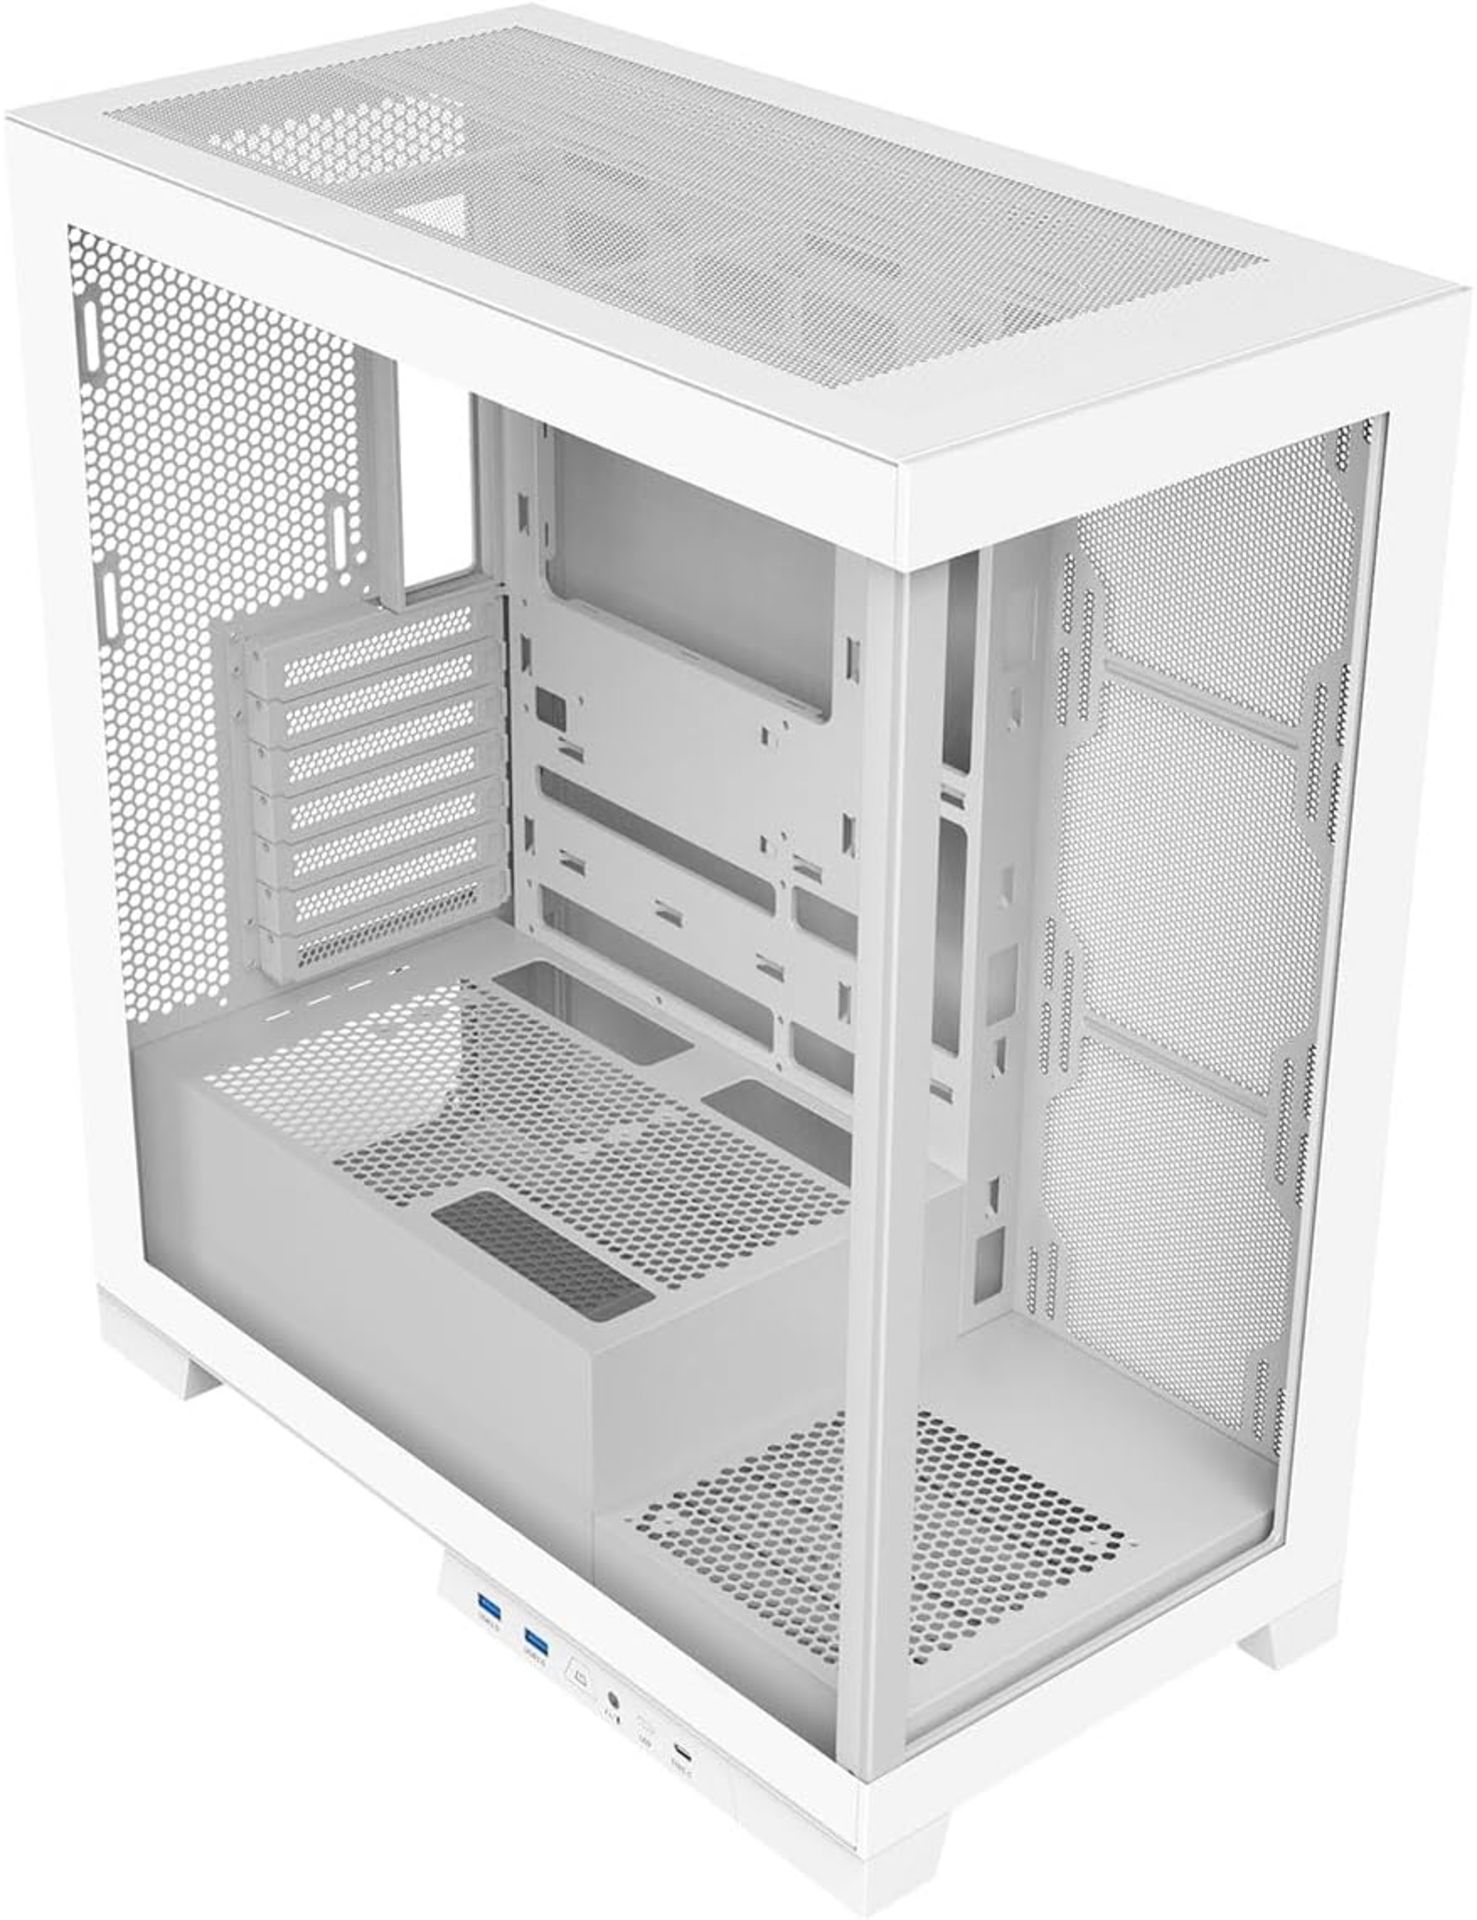 NEW & BOXED CIT Diamond XR Mid Tower PC Case With 7 Fans - WHITE. RRP £99.99. If you want a sharp- - Bild 3 aus 9